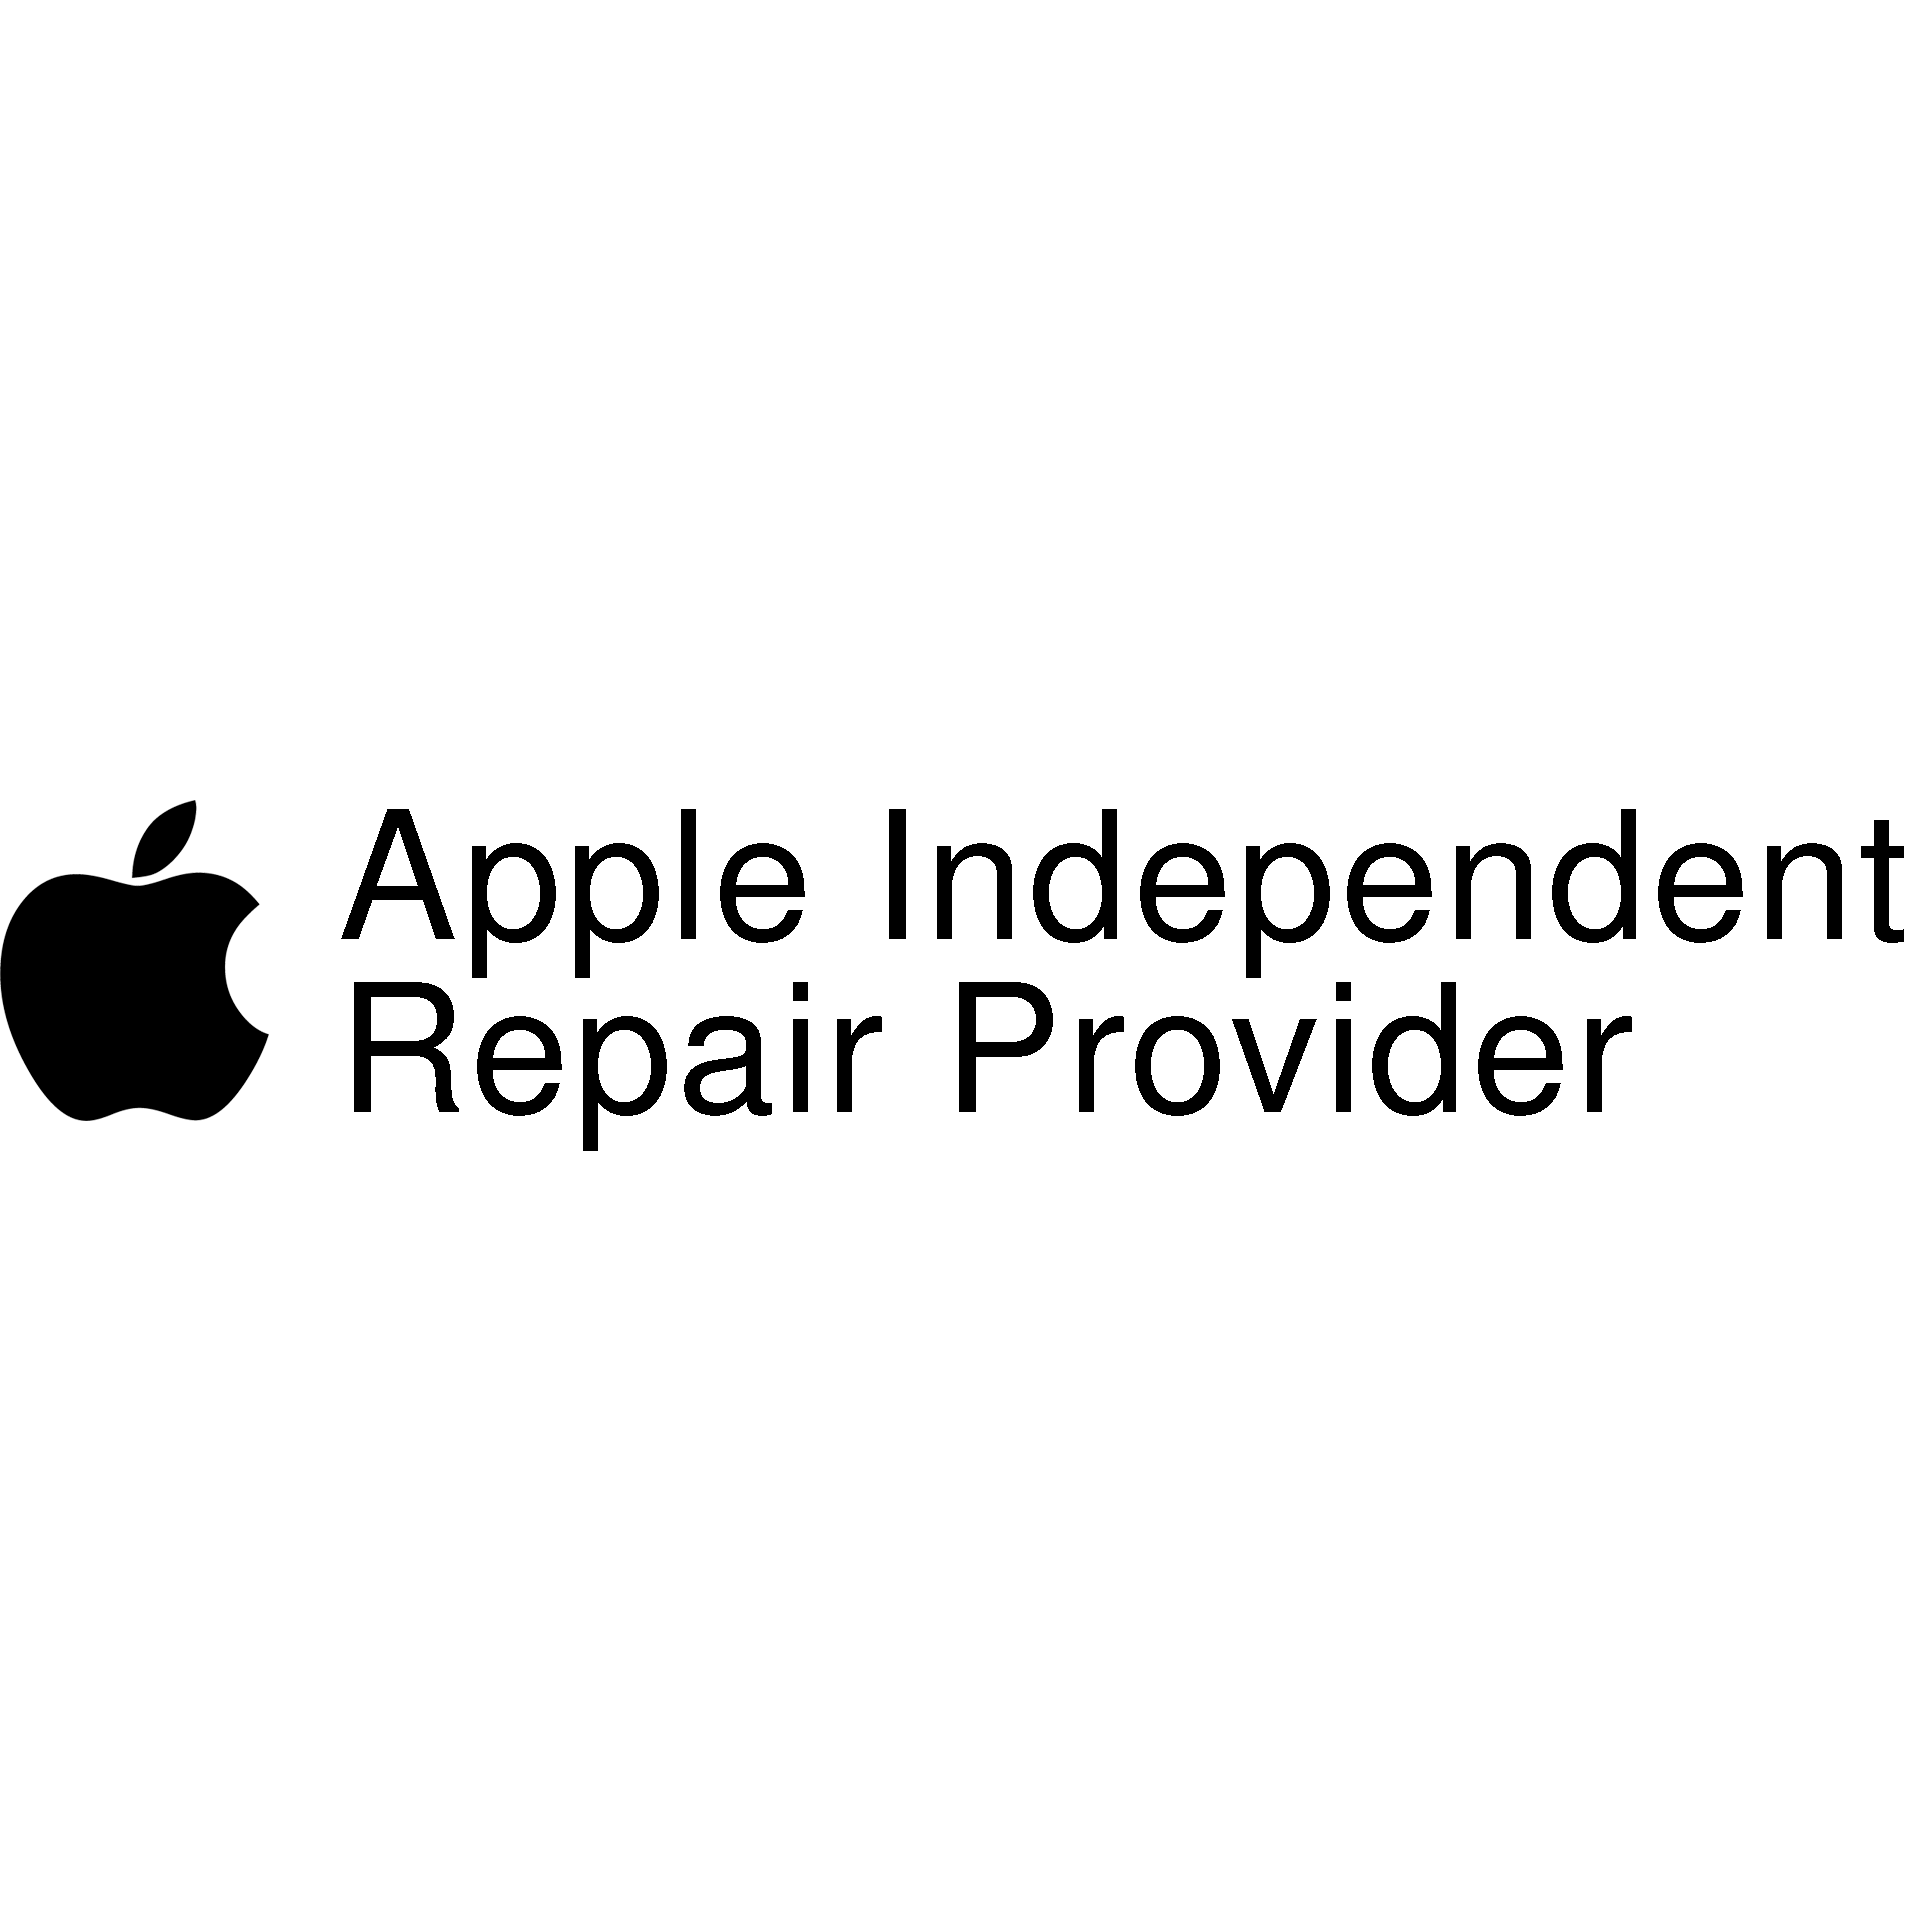 Apple Independent